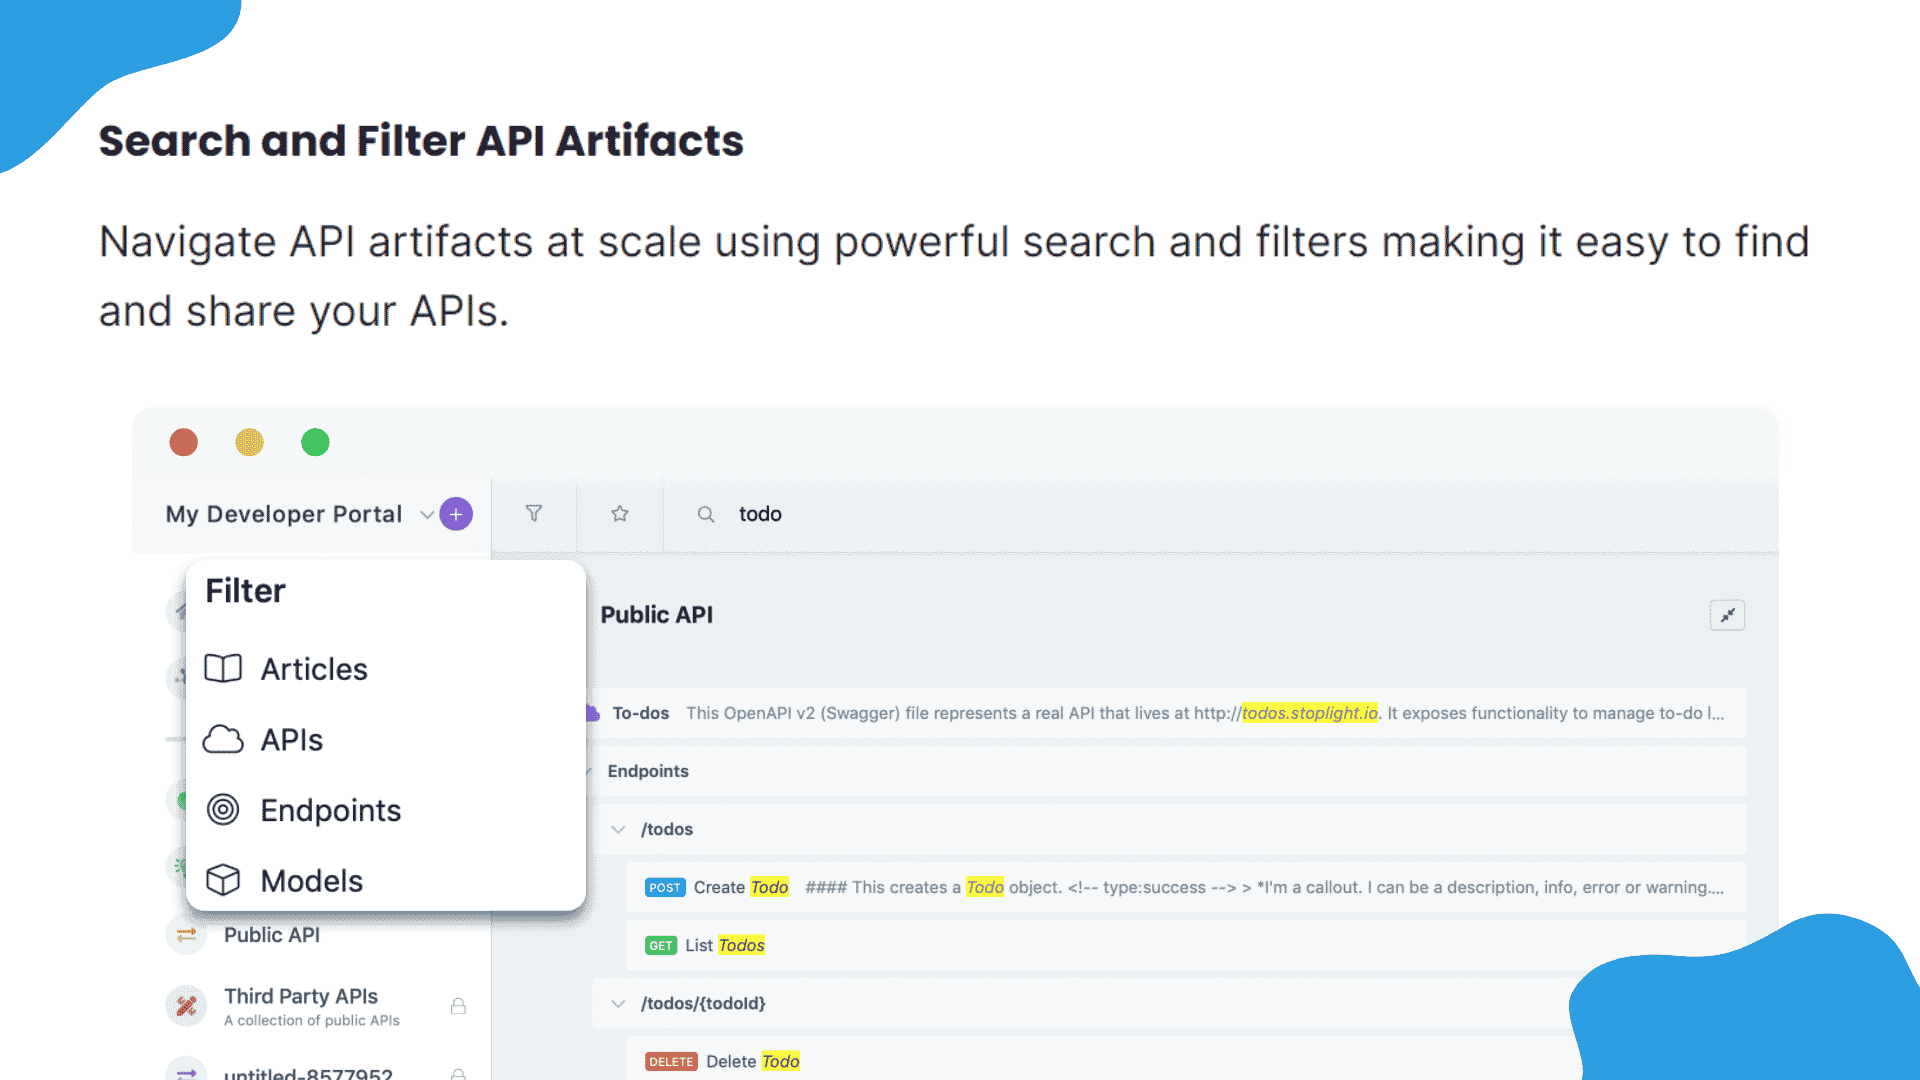 Key Features - Search Functionality